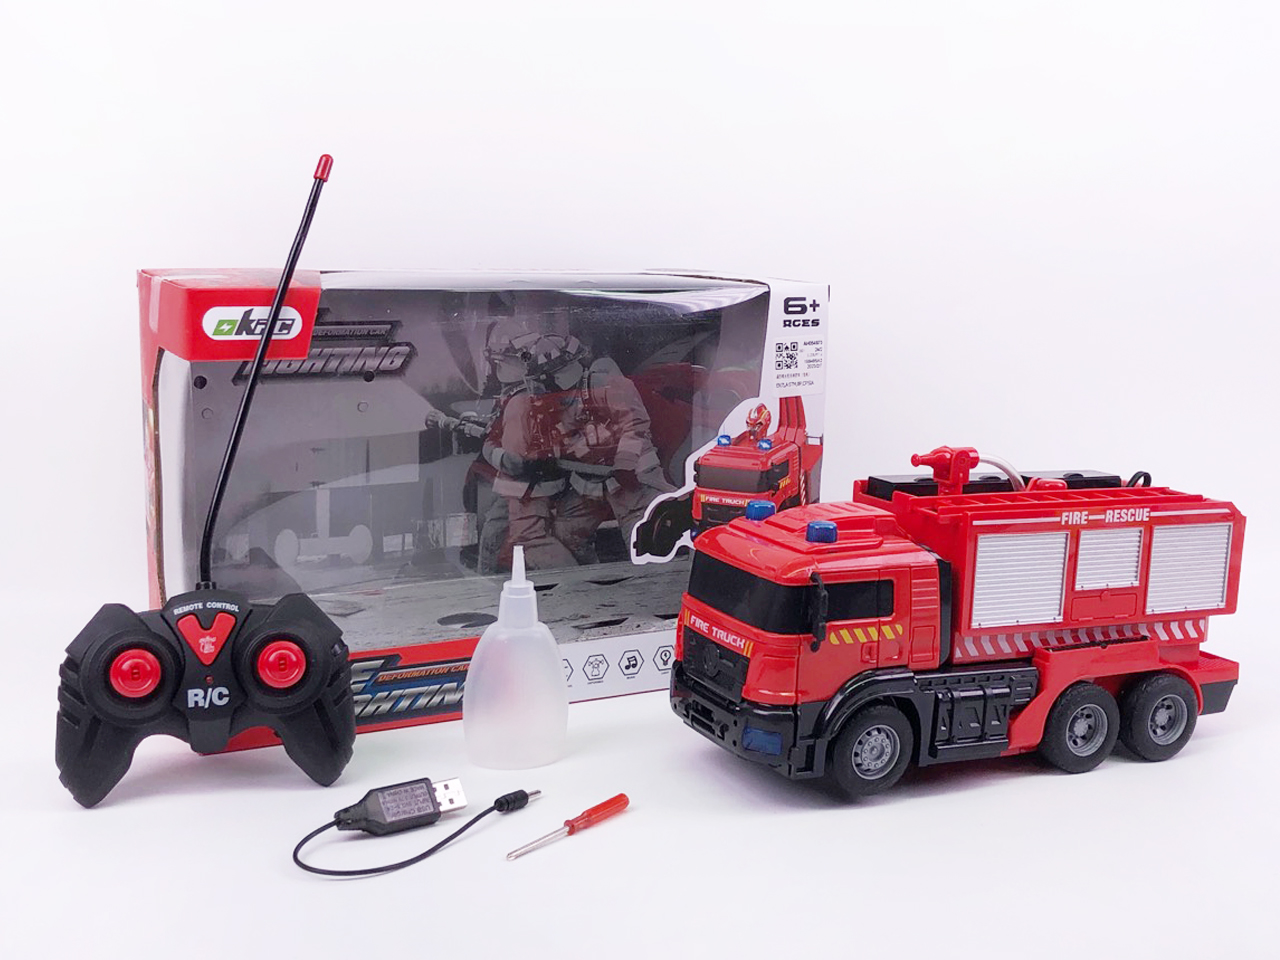 R/C Sprinkler Transforms Fire Engine W/Charge toys